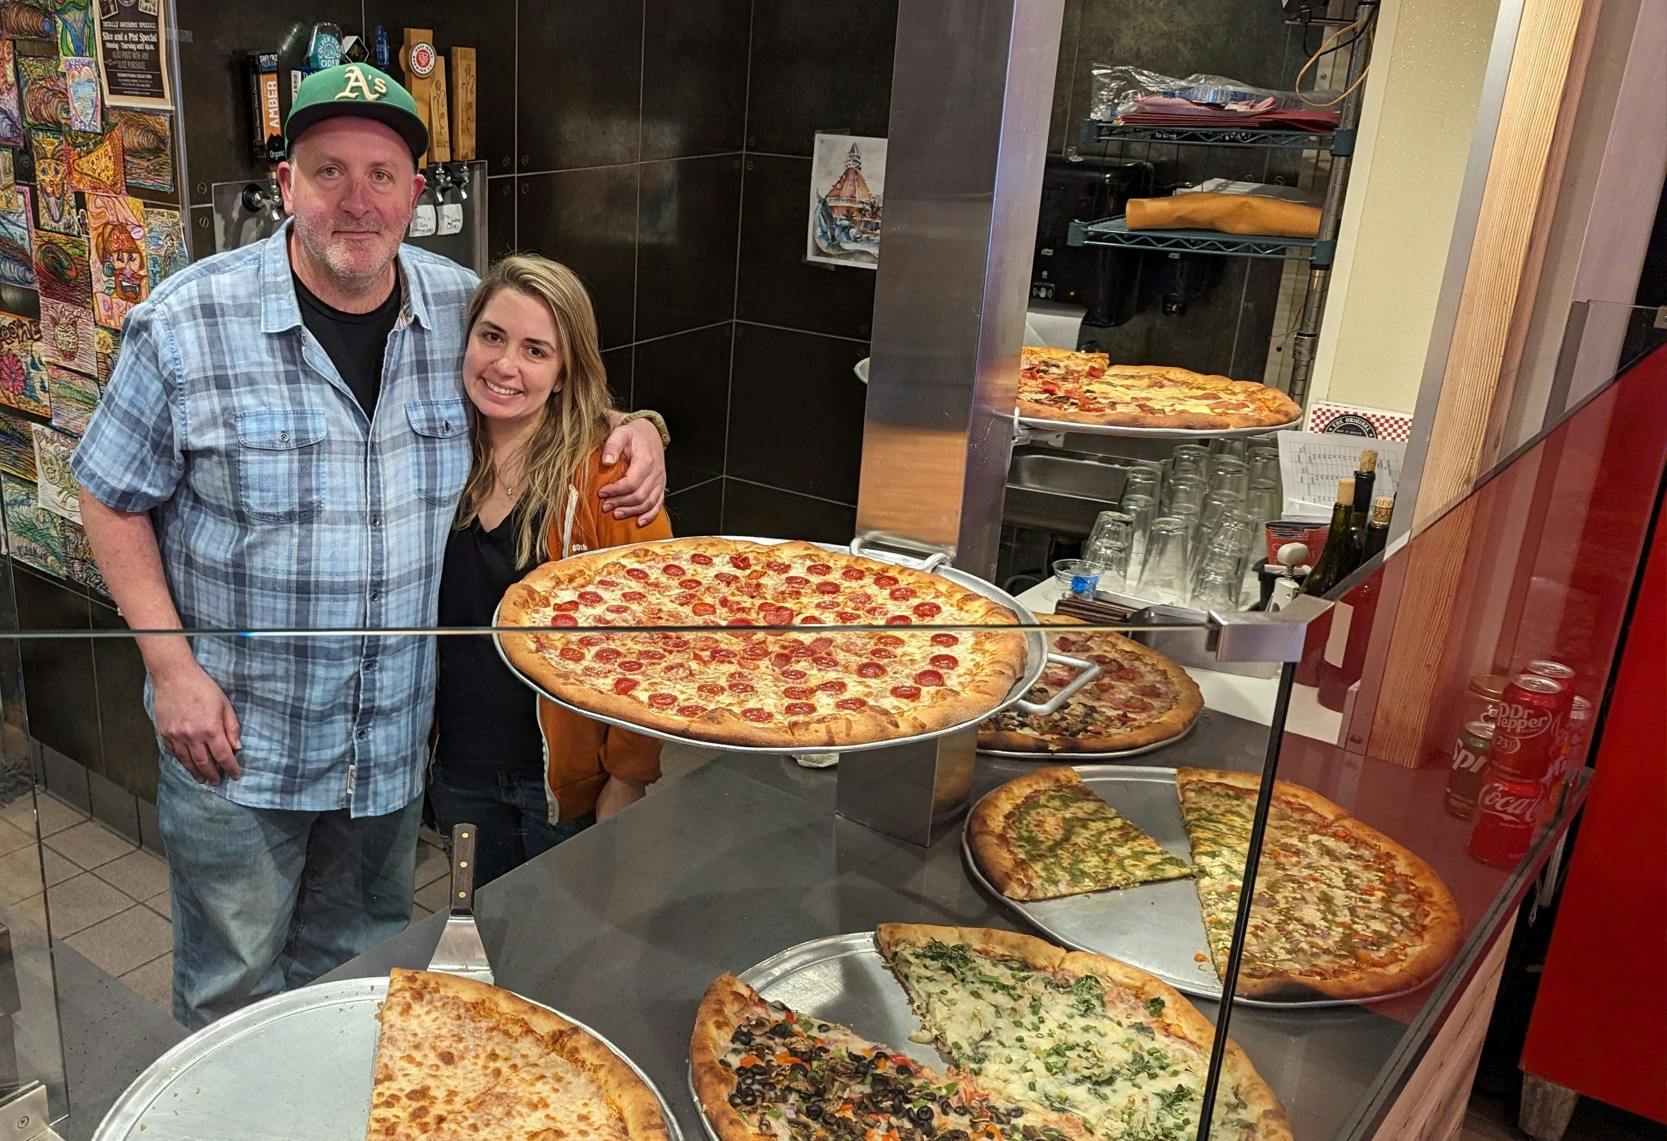 Sol Lipman and his partner Erica stand behind a counter full of pizzas at their Downtown Santa Cruz Pleasure Pizza